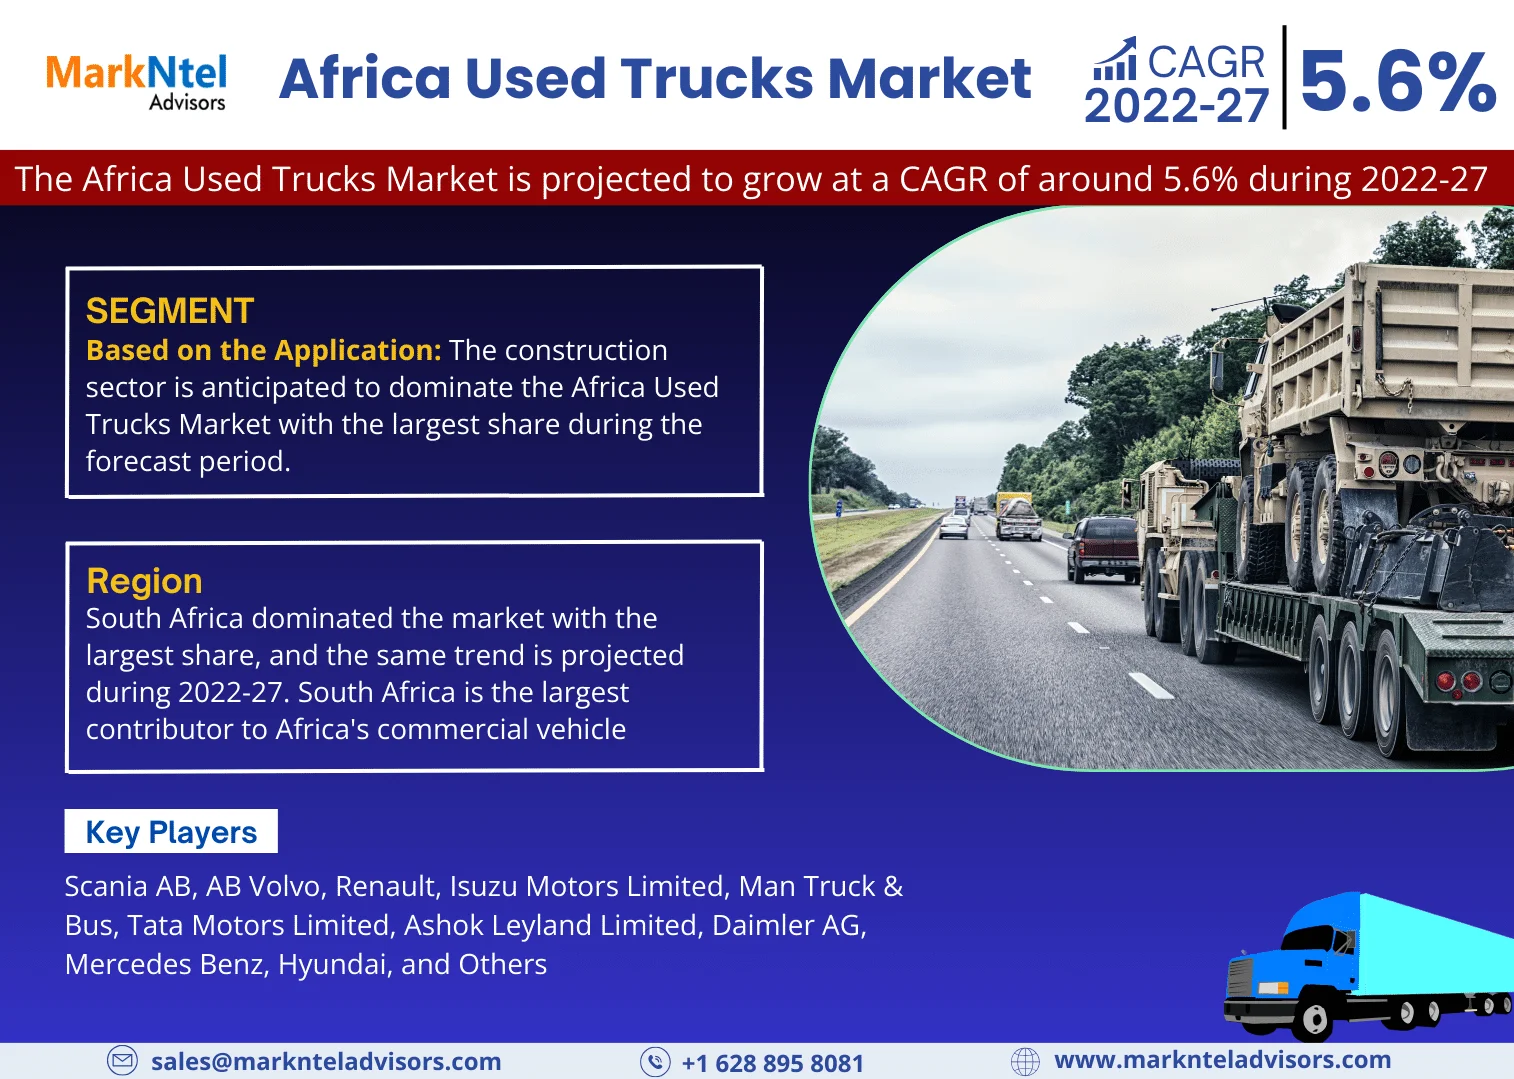 Africa Used Trucks Market Research Report: Forecast (2022-2027)